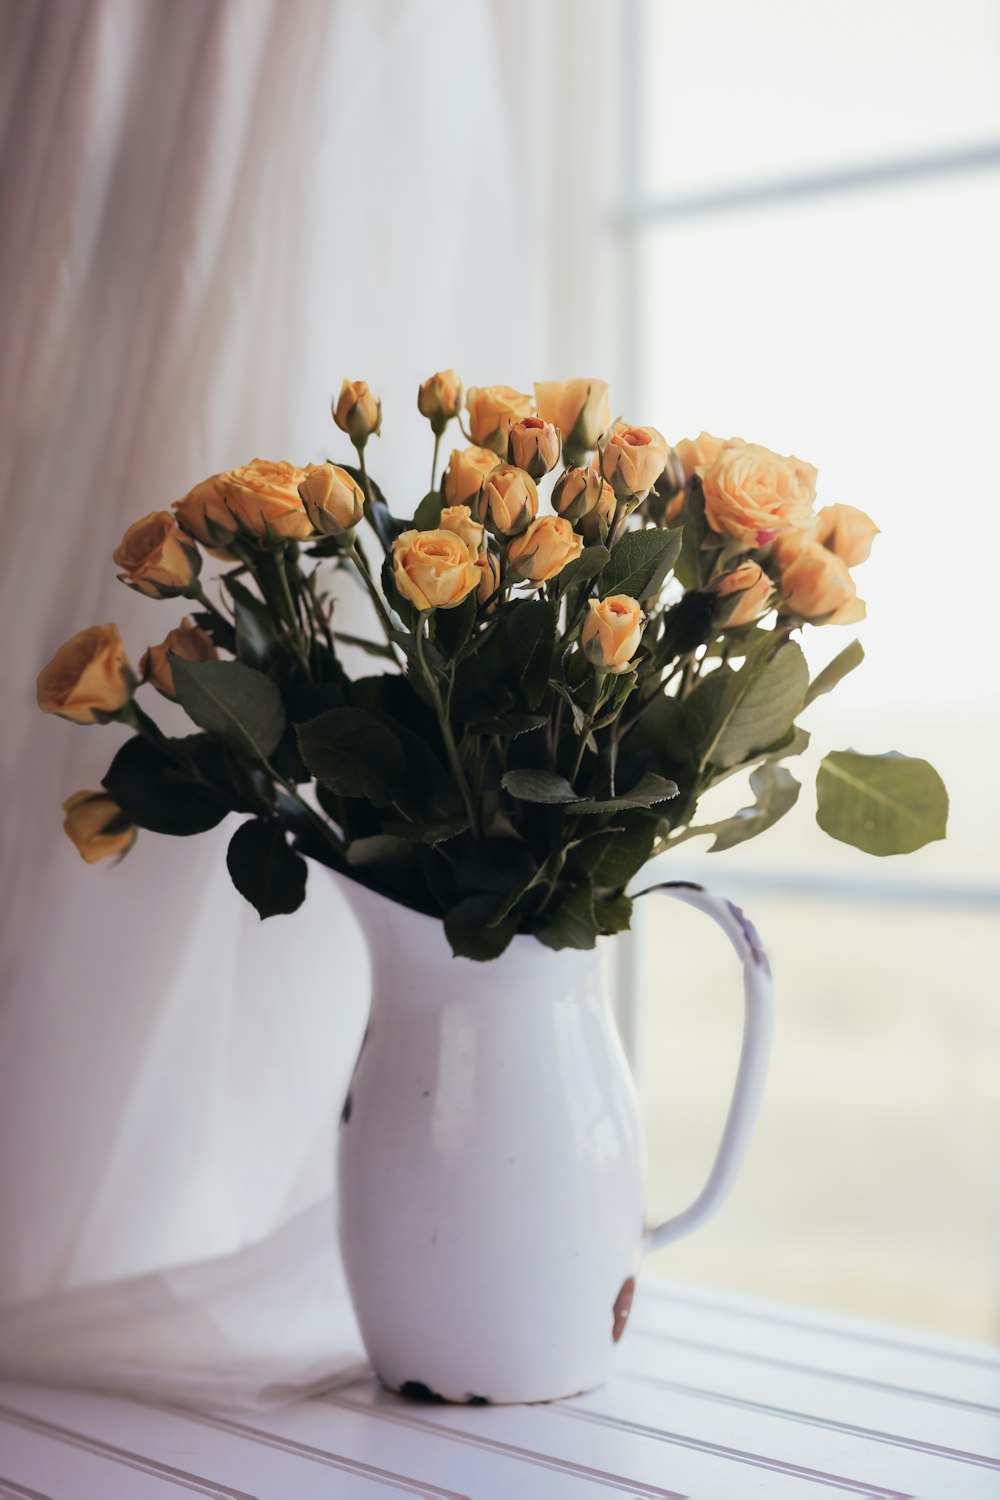 a white pitcher filled with yellow roses on a table